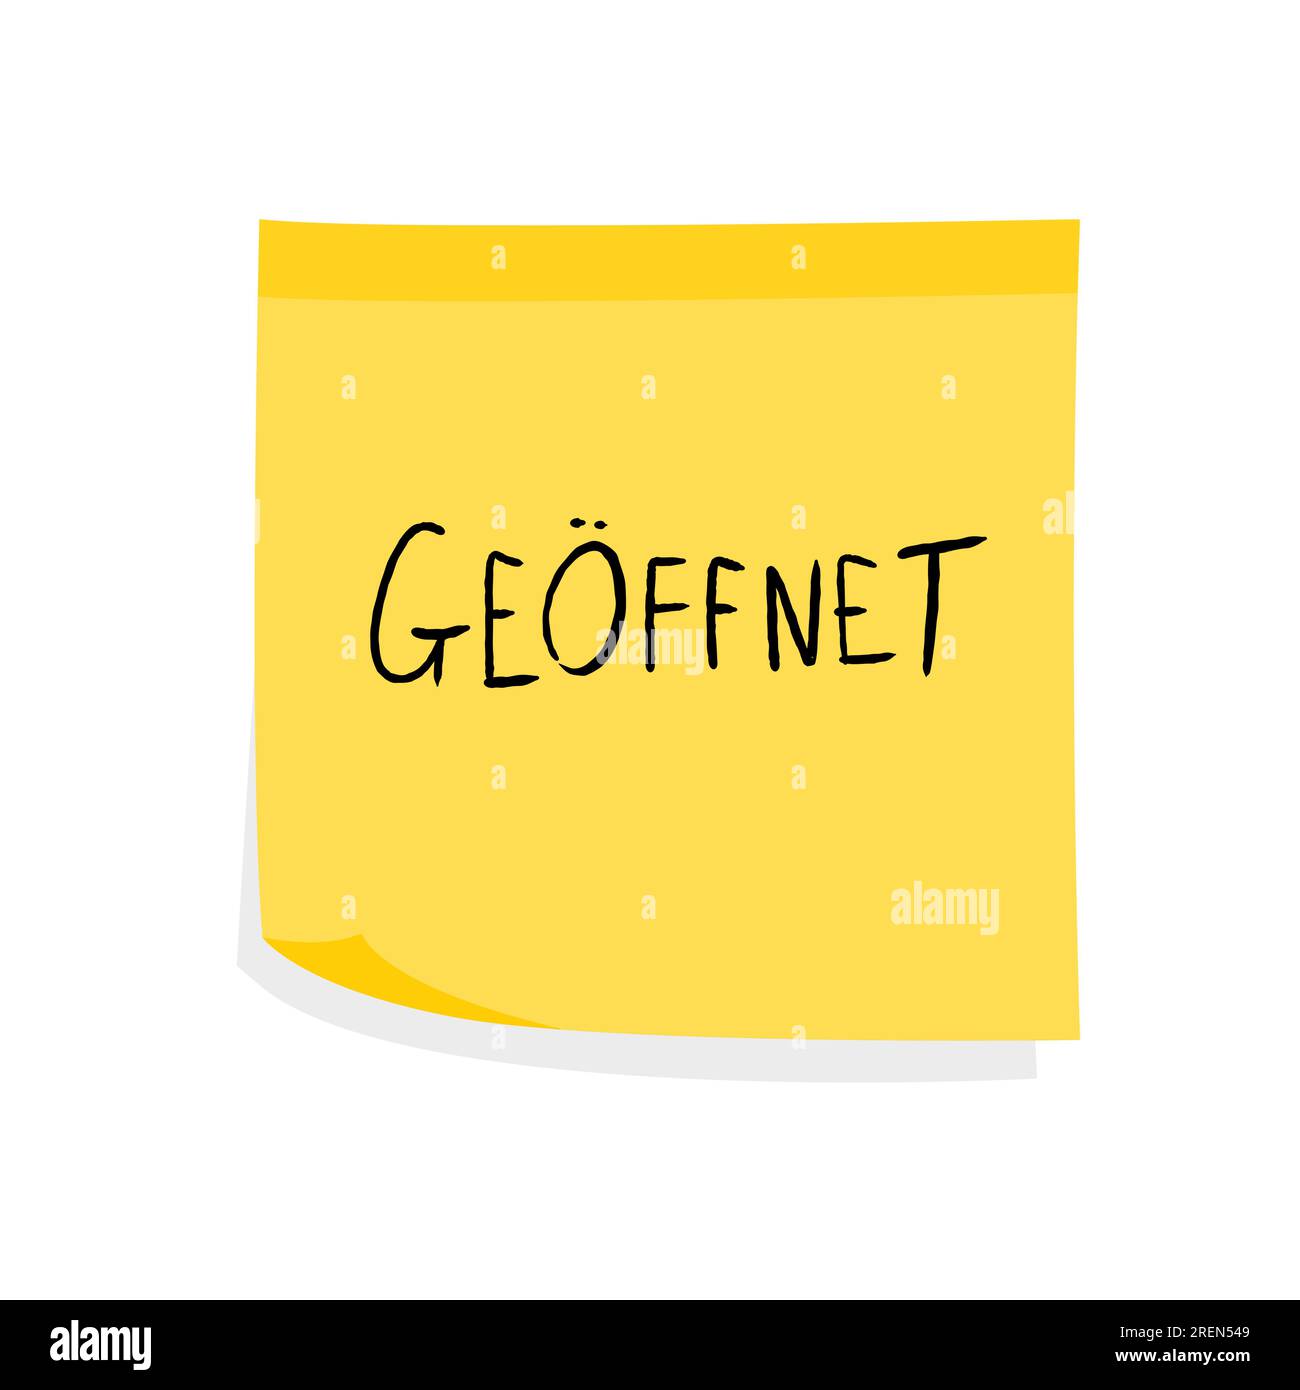 Geoffnet means open in German language. Yellow sticky note message. Paper sign. Stock Vector